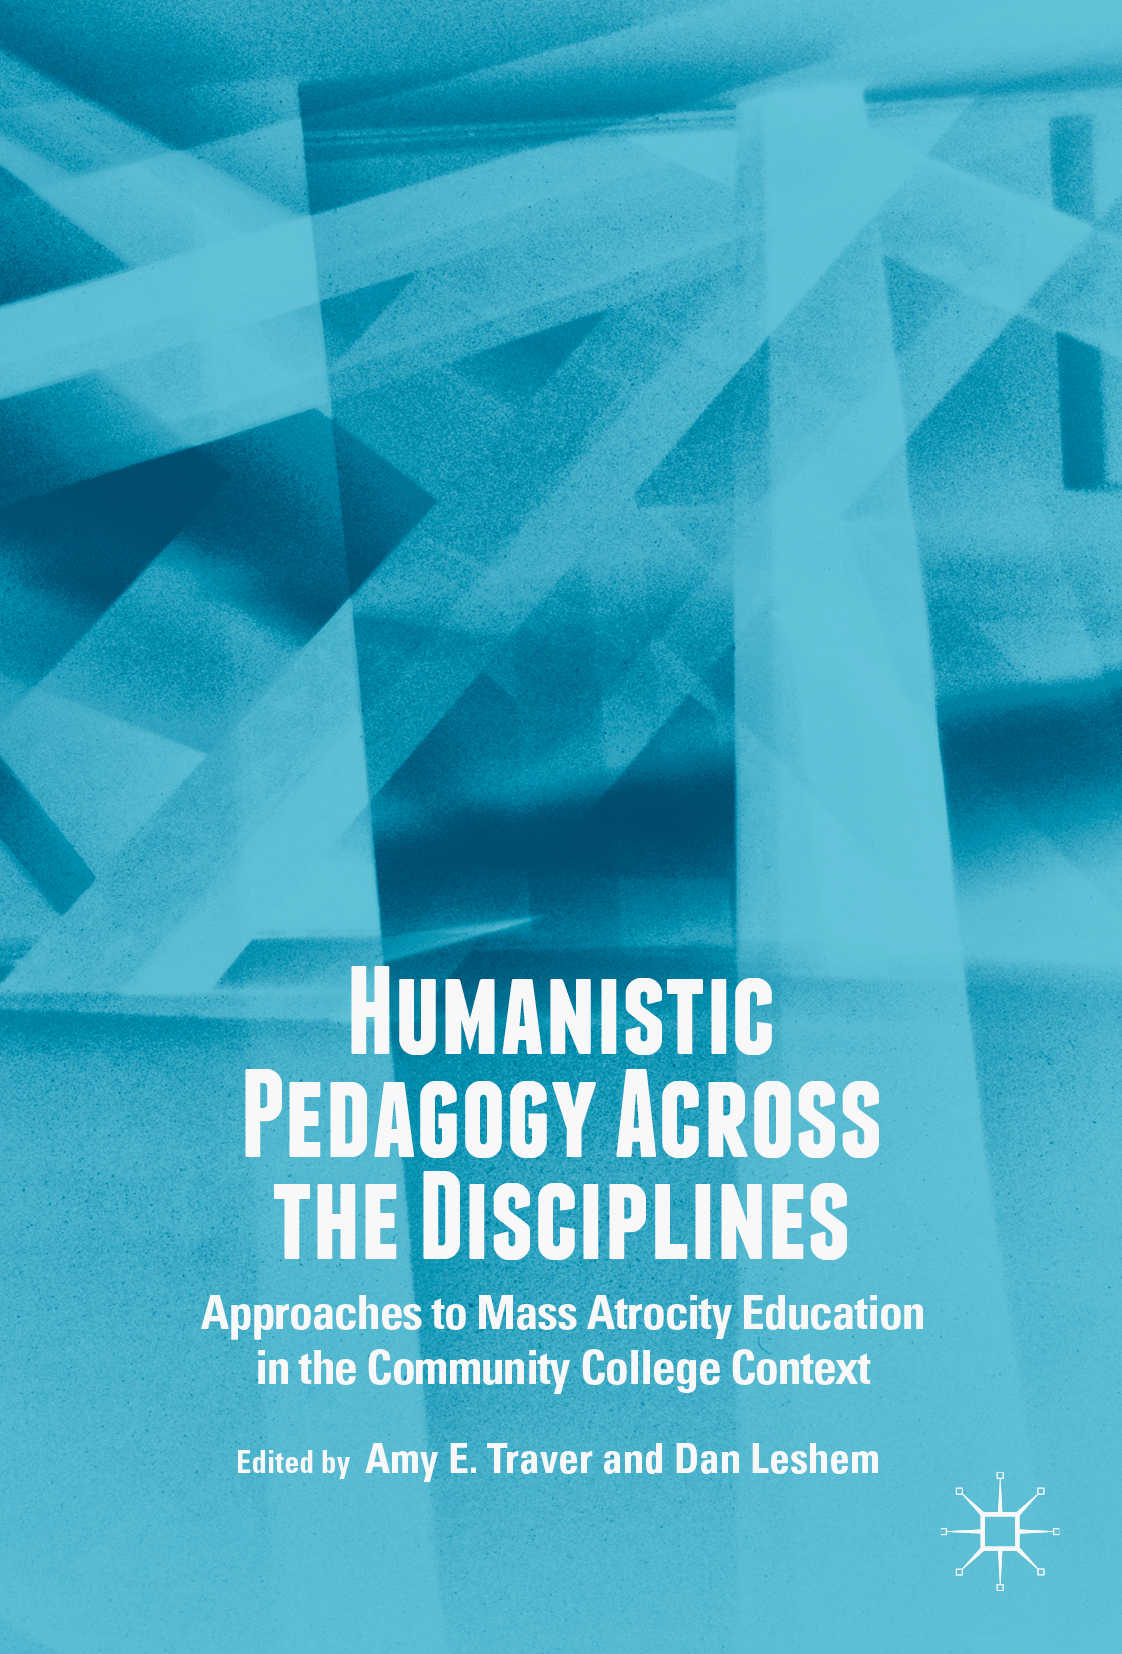 Book Cover: Humanistic Pedagogy Across the Disciplines: Approaches to Mass Atrocity Education in the Community College Context